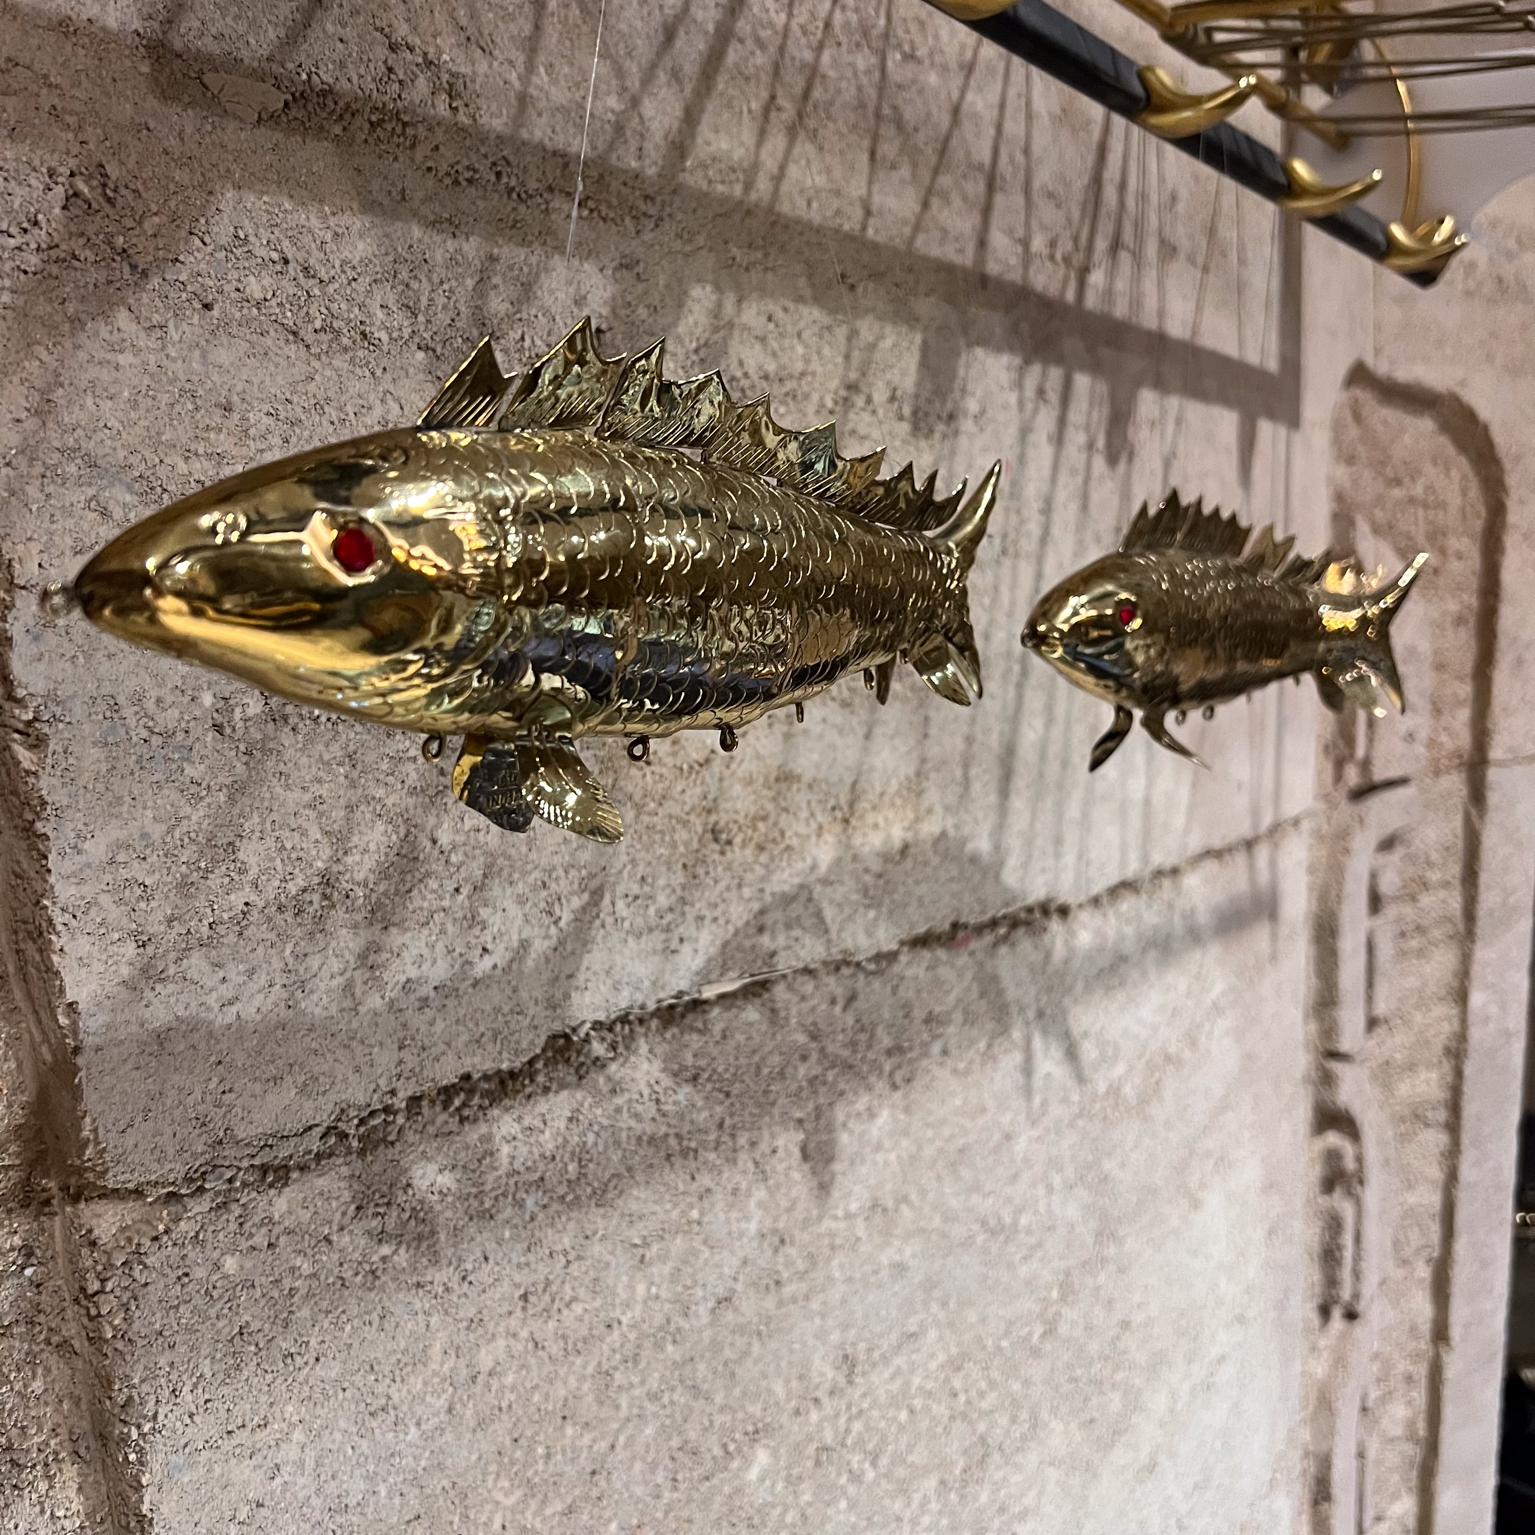 
Modern Articulated Brass Fish Wall Sculpture
two fish sculpture
Signed
11.5 long x 3.25 w x 4 h
Original preowned unrestored vintage condition
Refer to images listed.